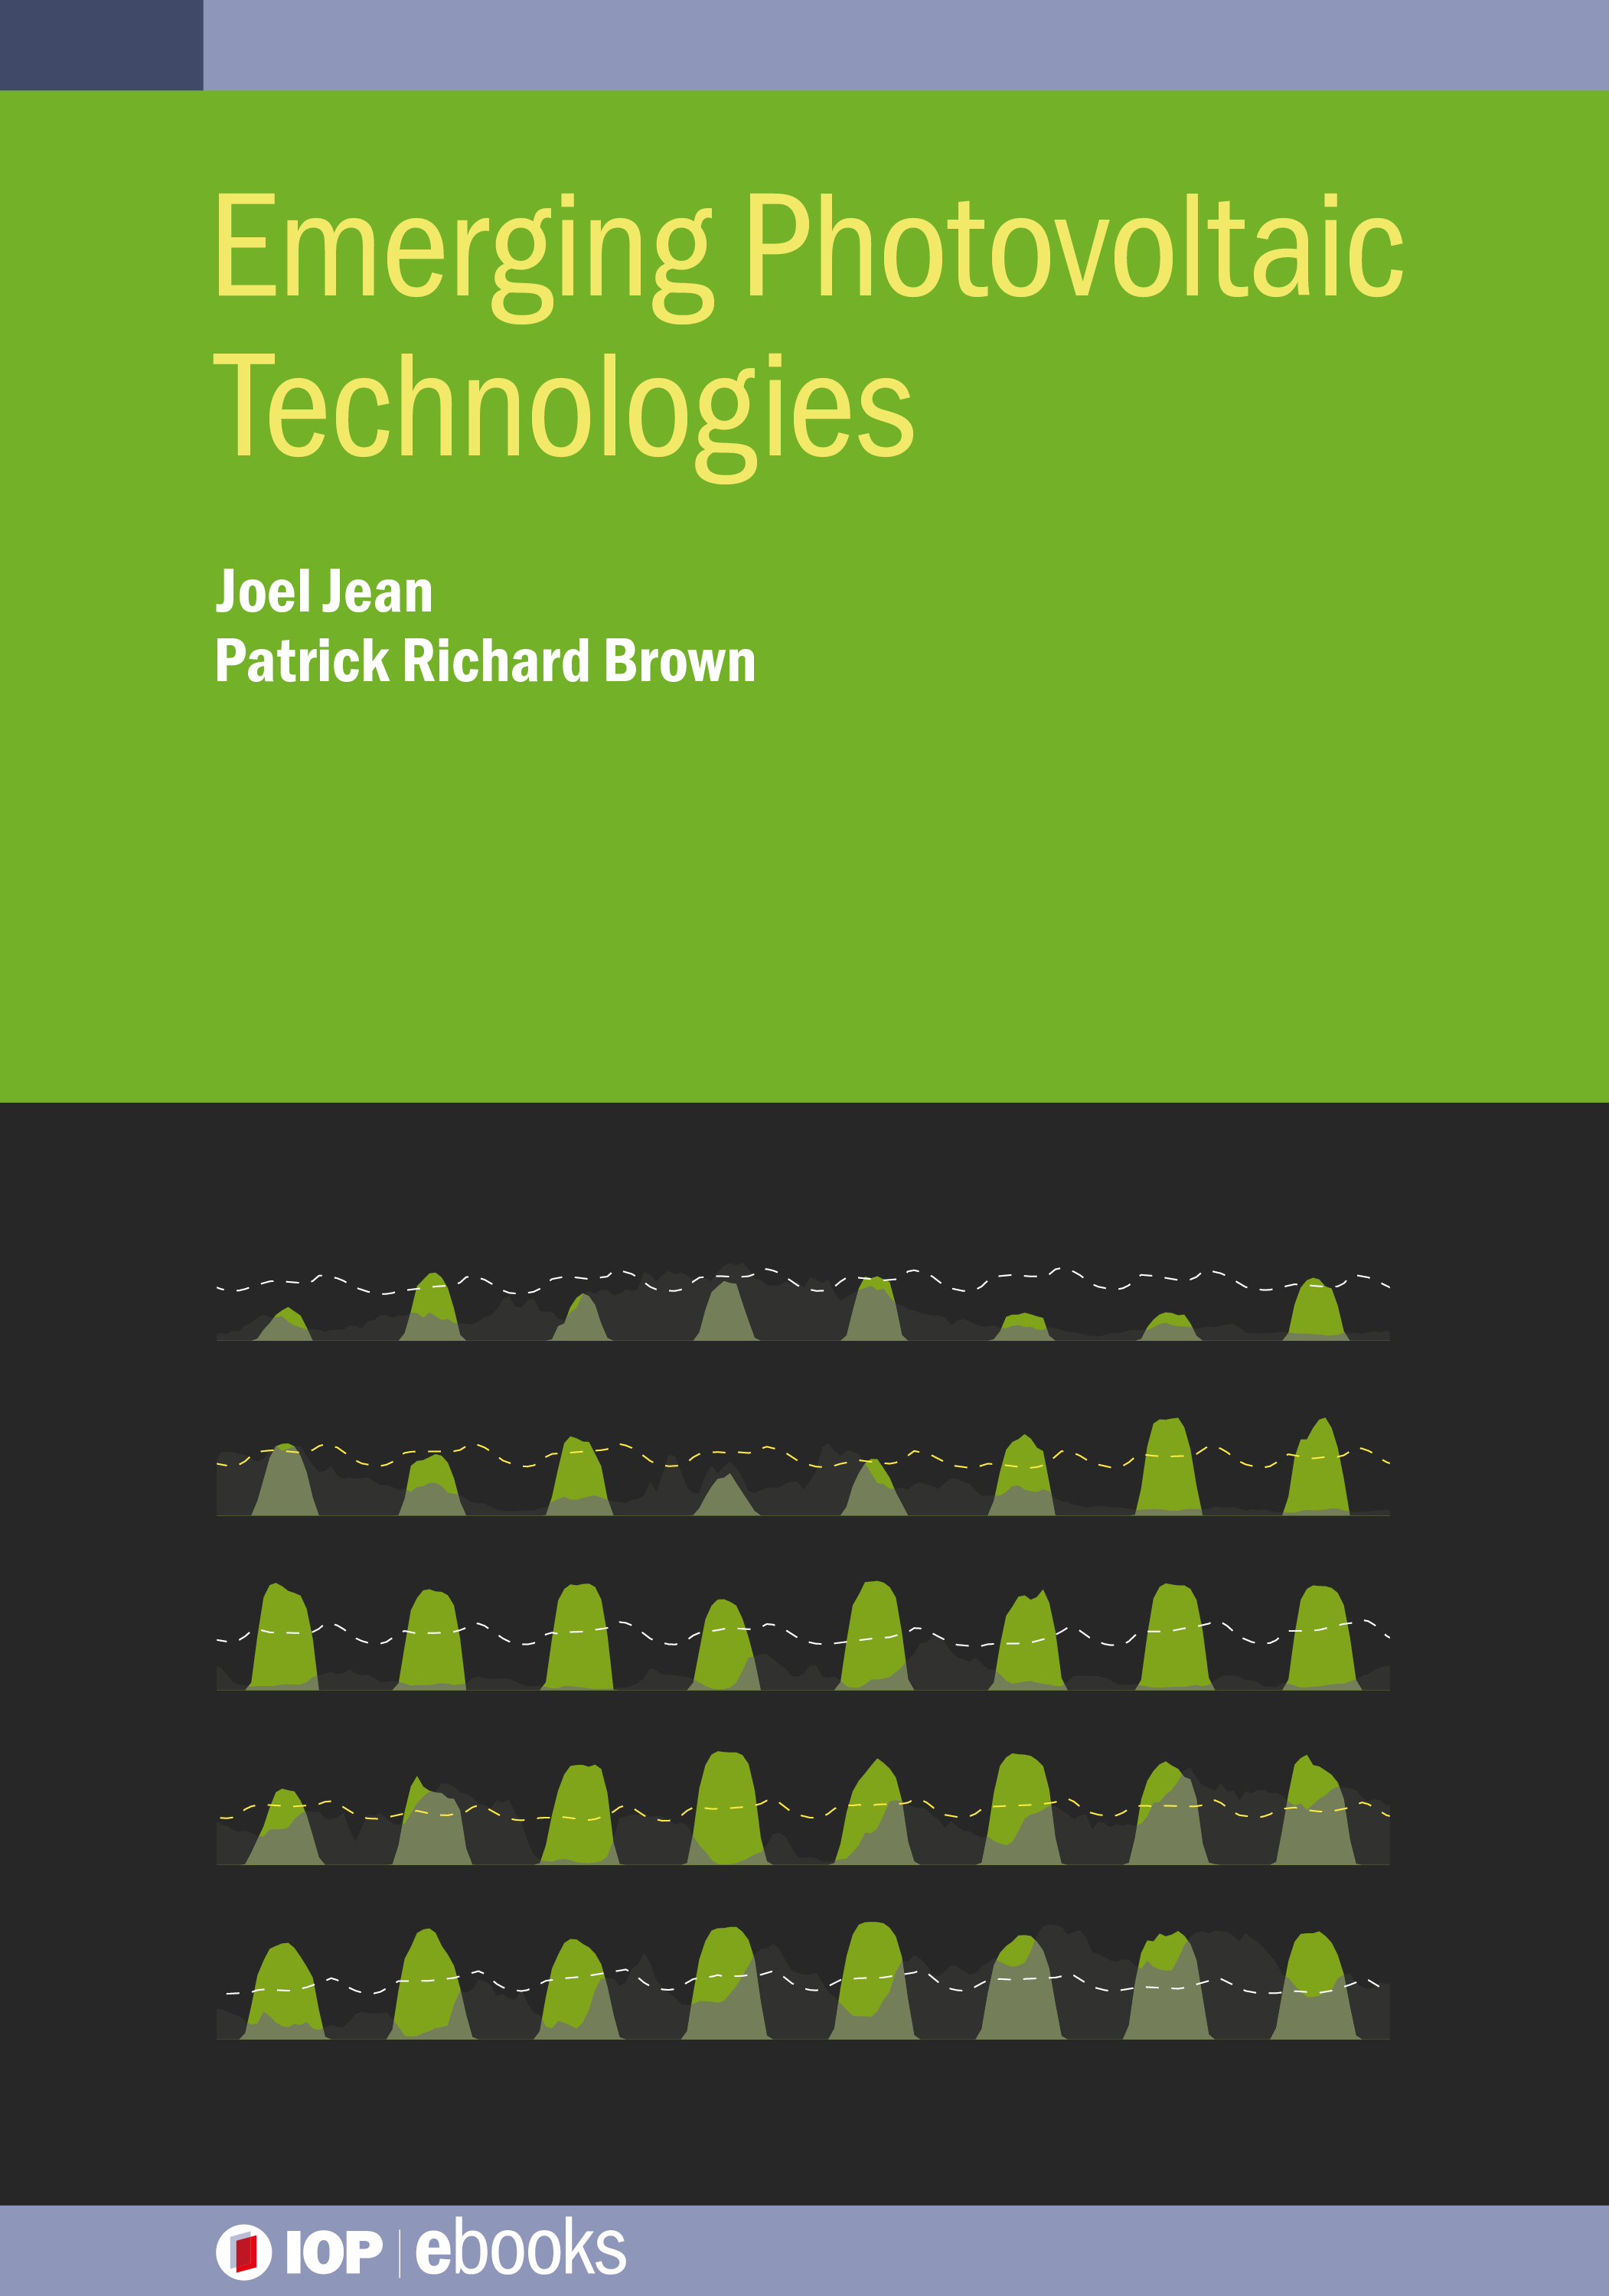 Emerging Photovoltaic Technologies book cover